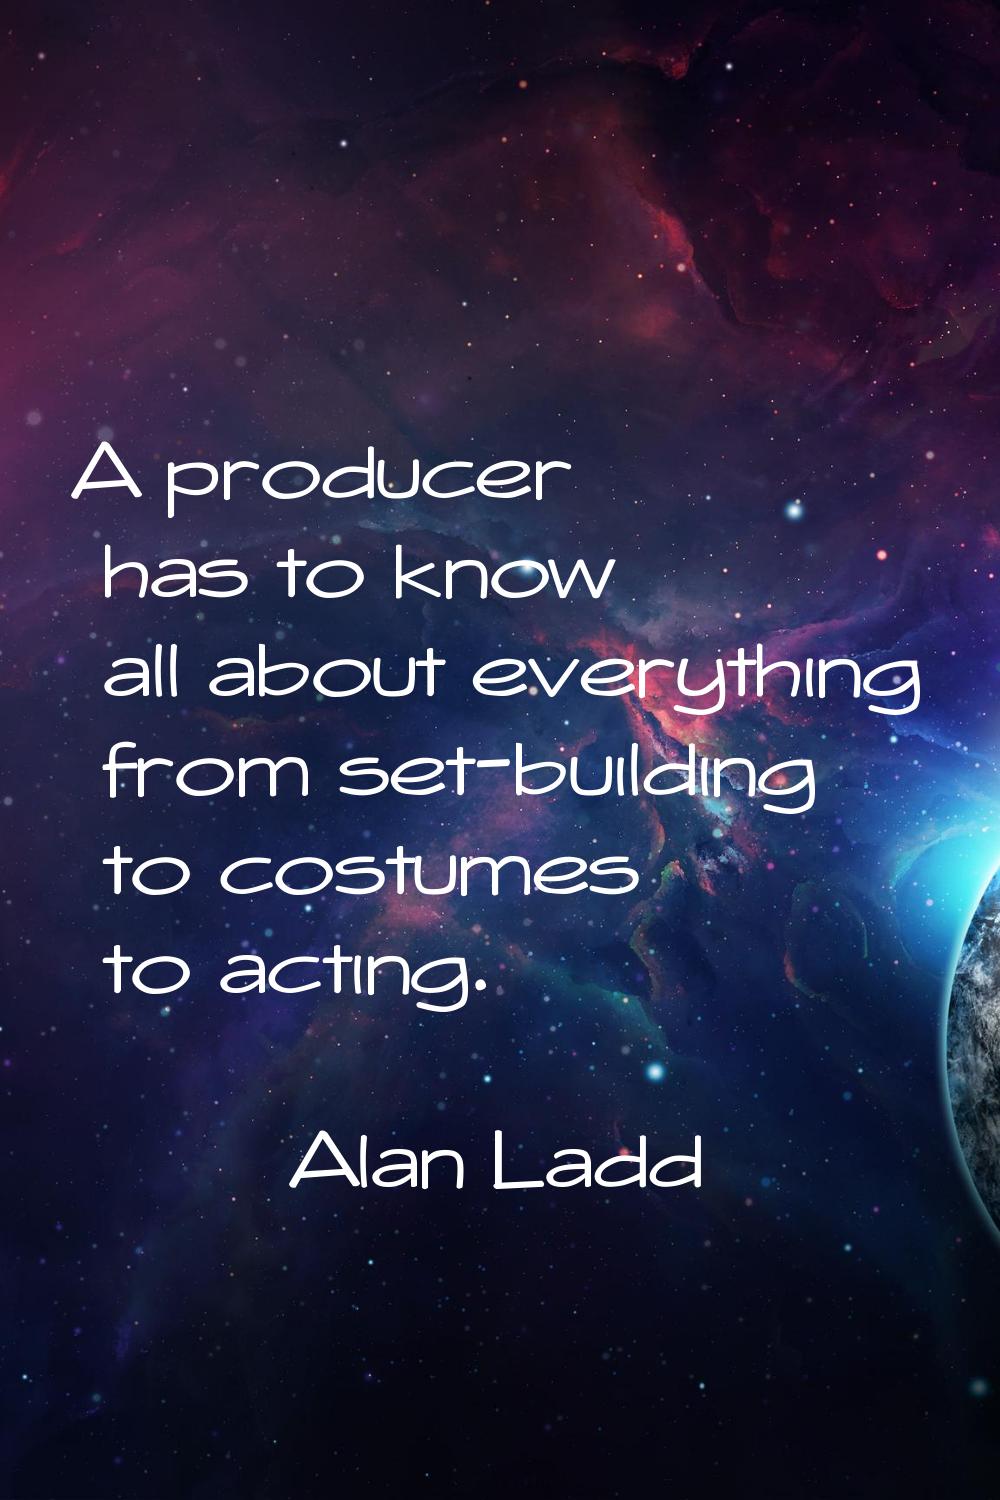 A producer has to know all about everything from set-building to costumes to acting.